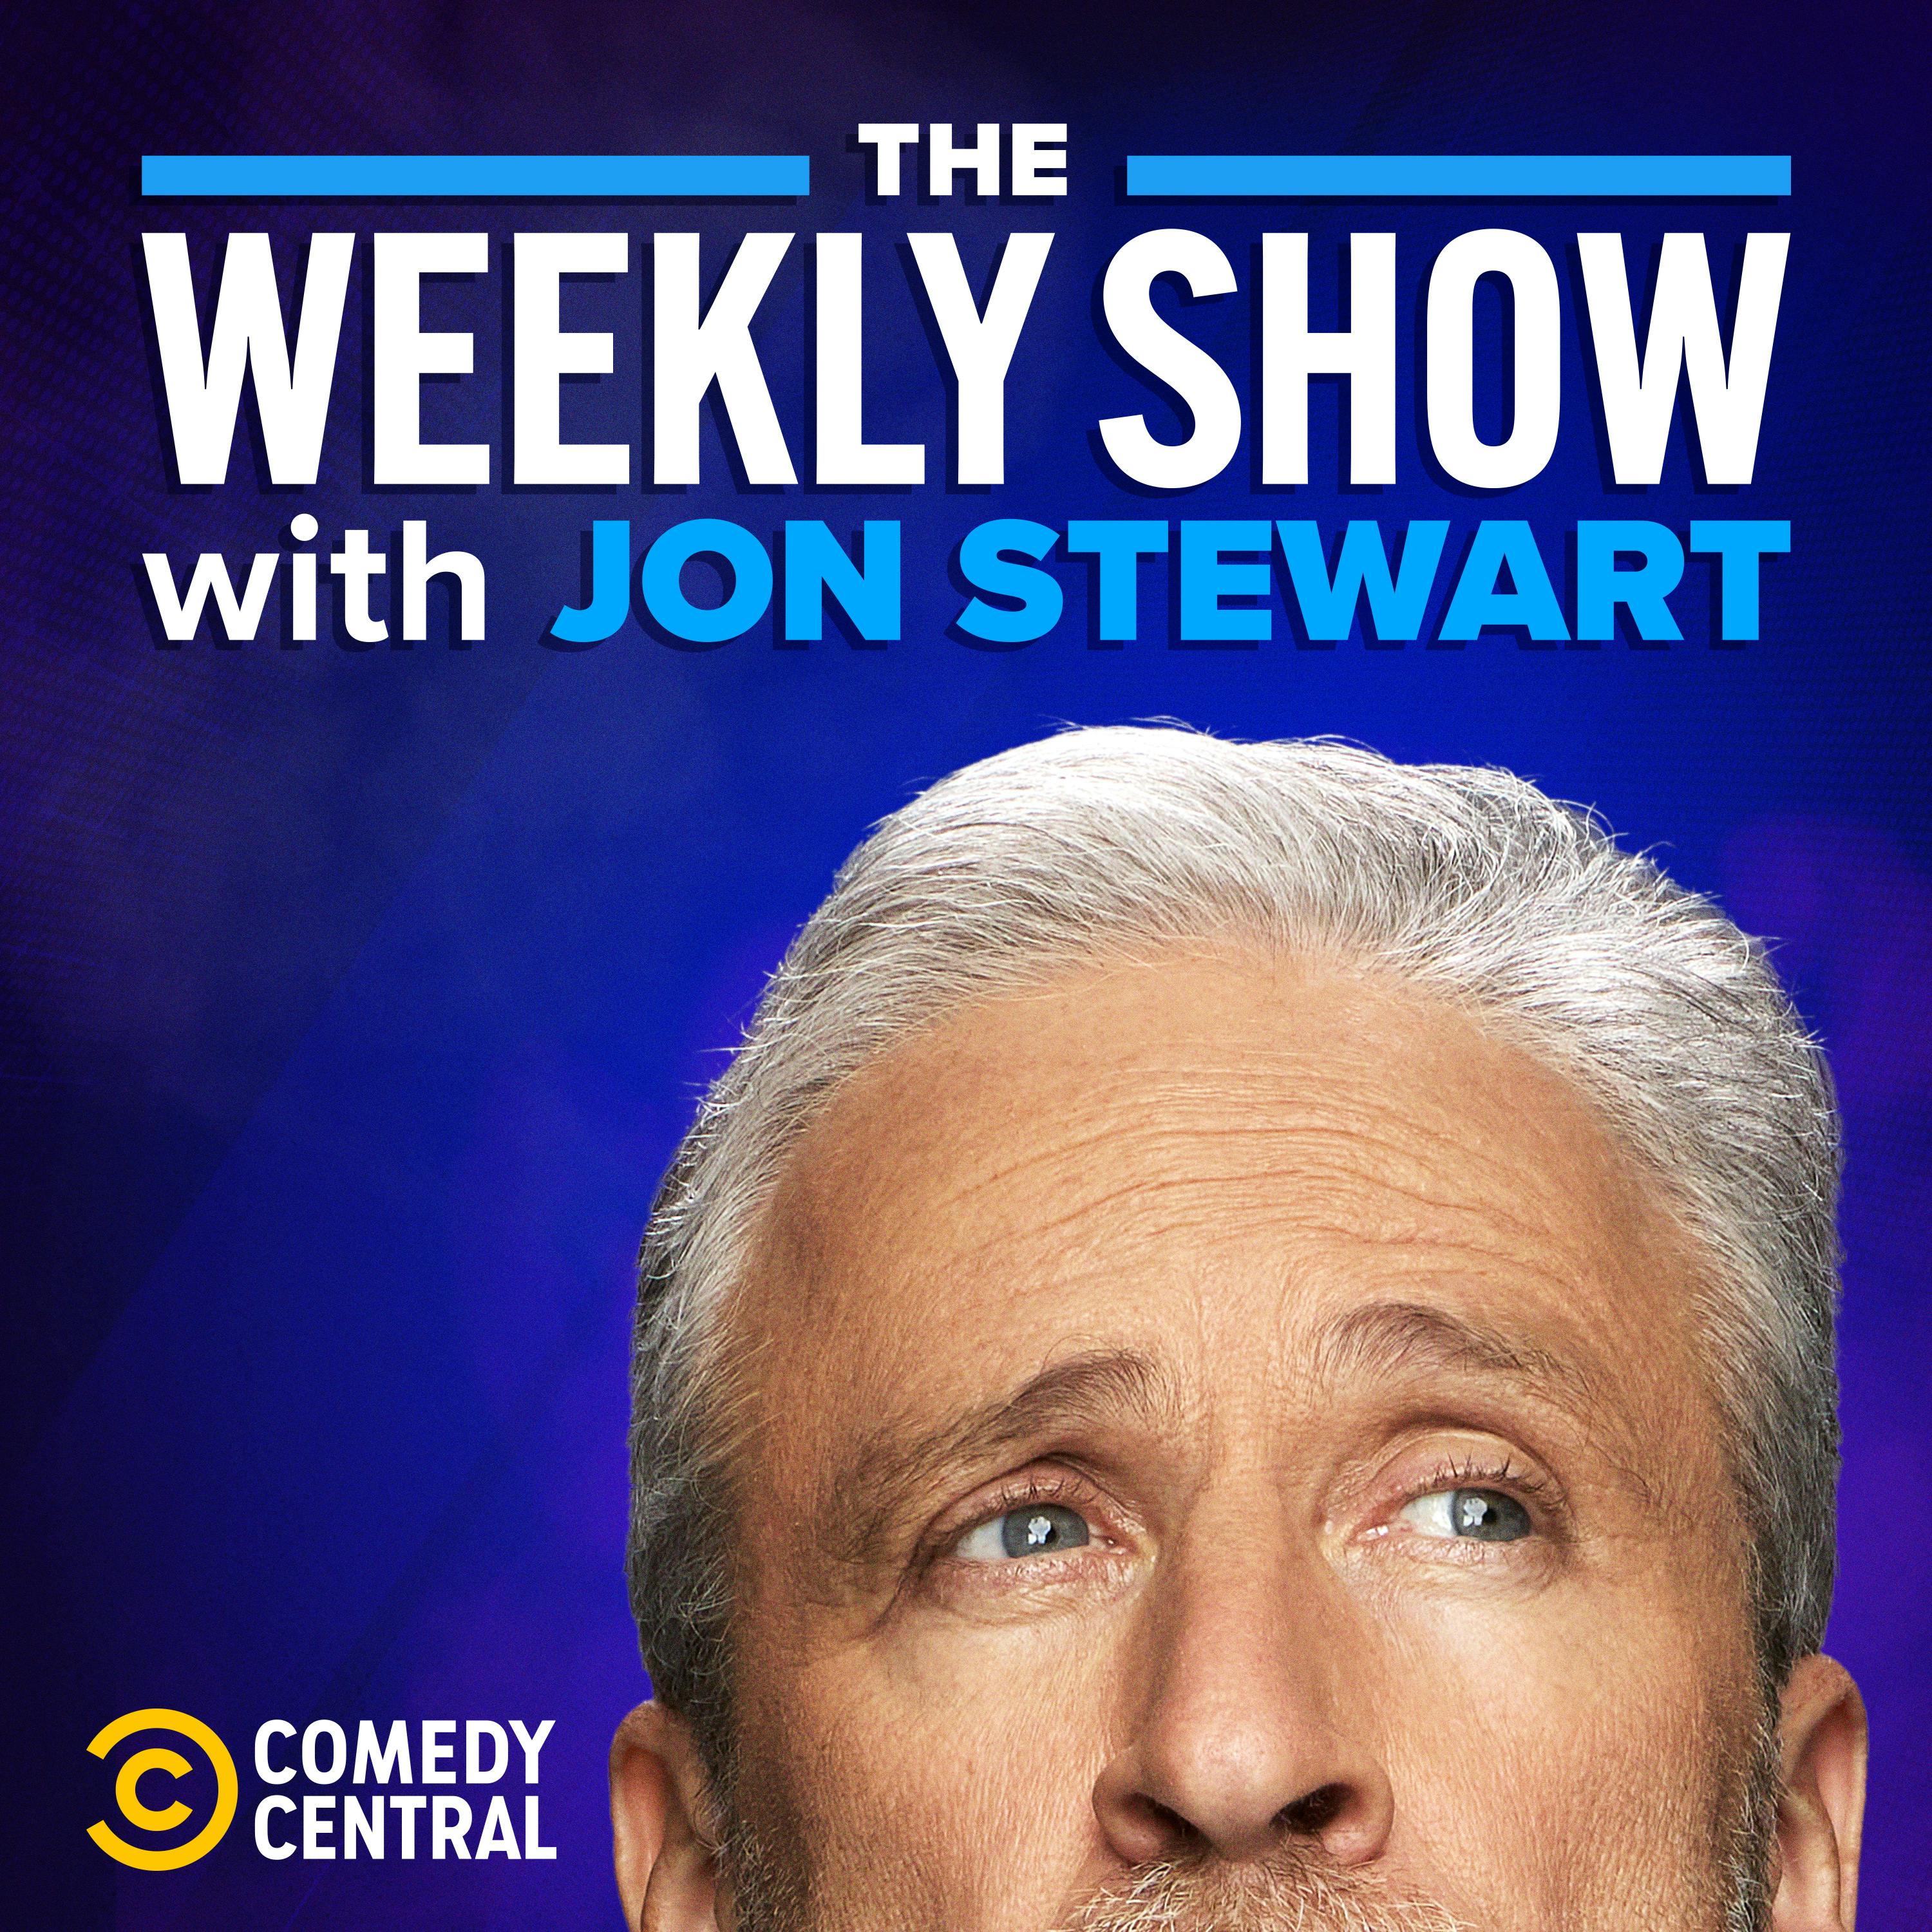 The Weekly Show with Jon Stewart